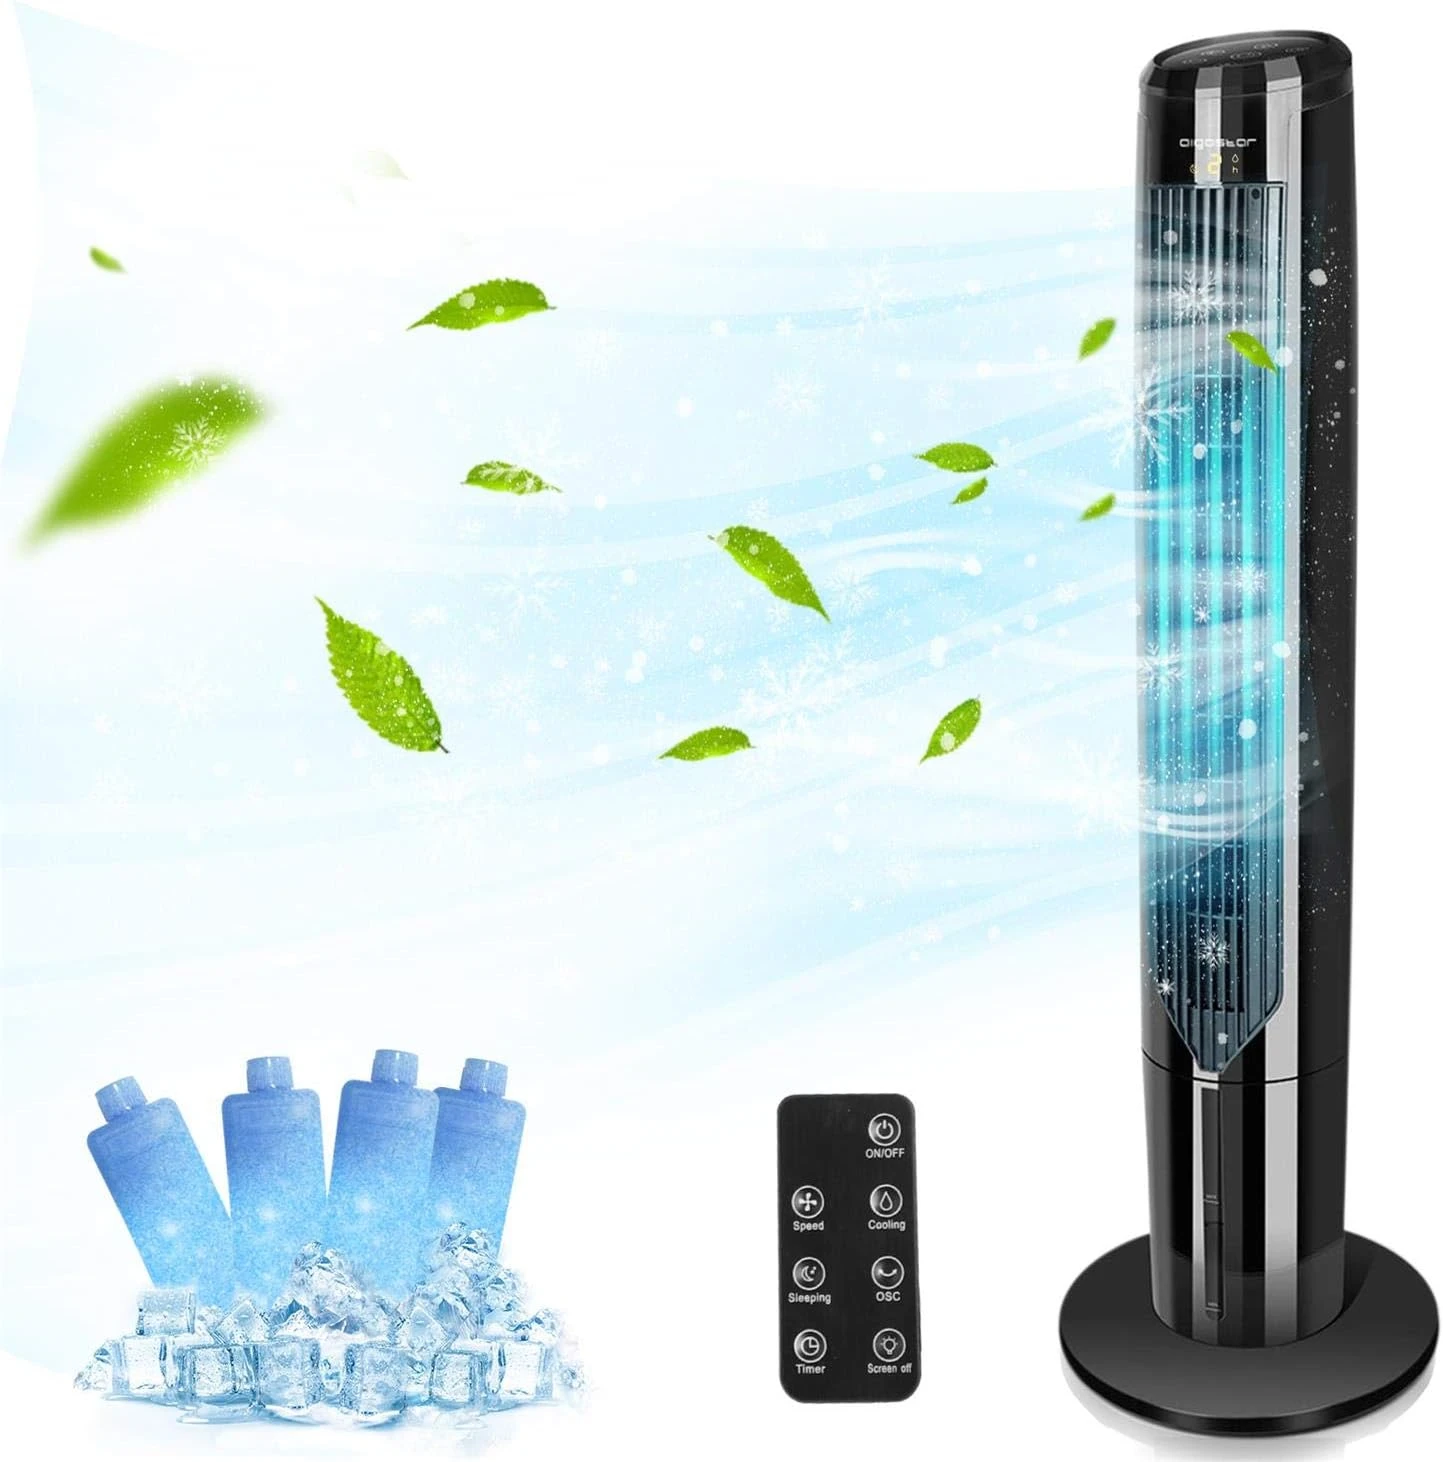 

Fan with Remote Oscillating Quiet Bladeless Evaporative Air Cooler Humidifier for Room, Water Tank, LED Display, 1-9H Timer, 40&